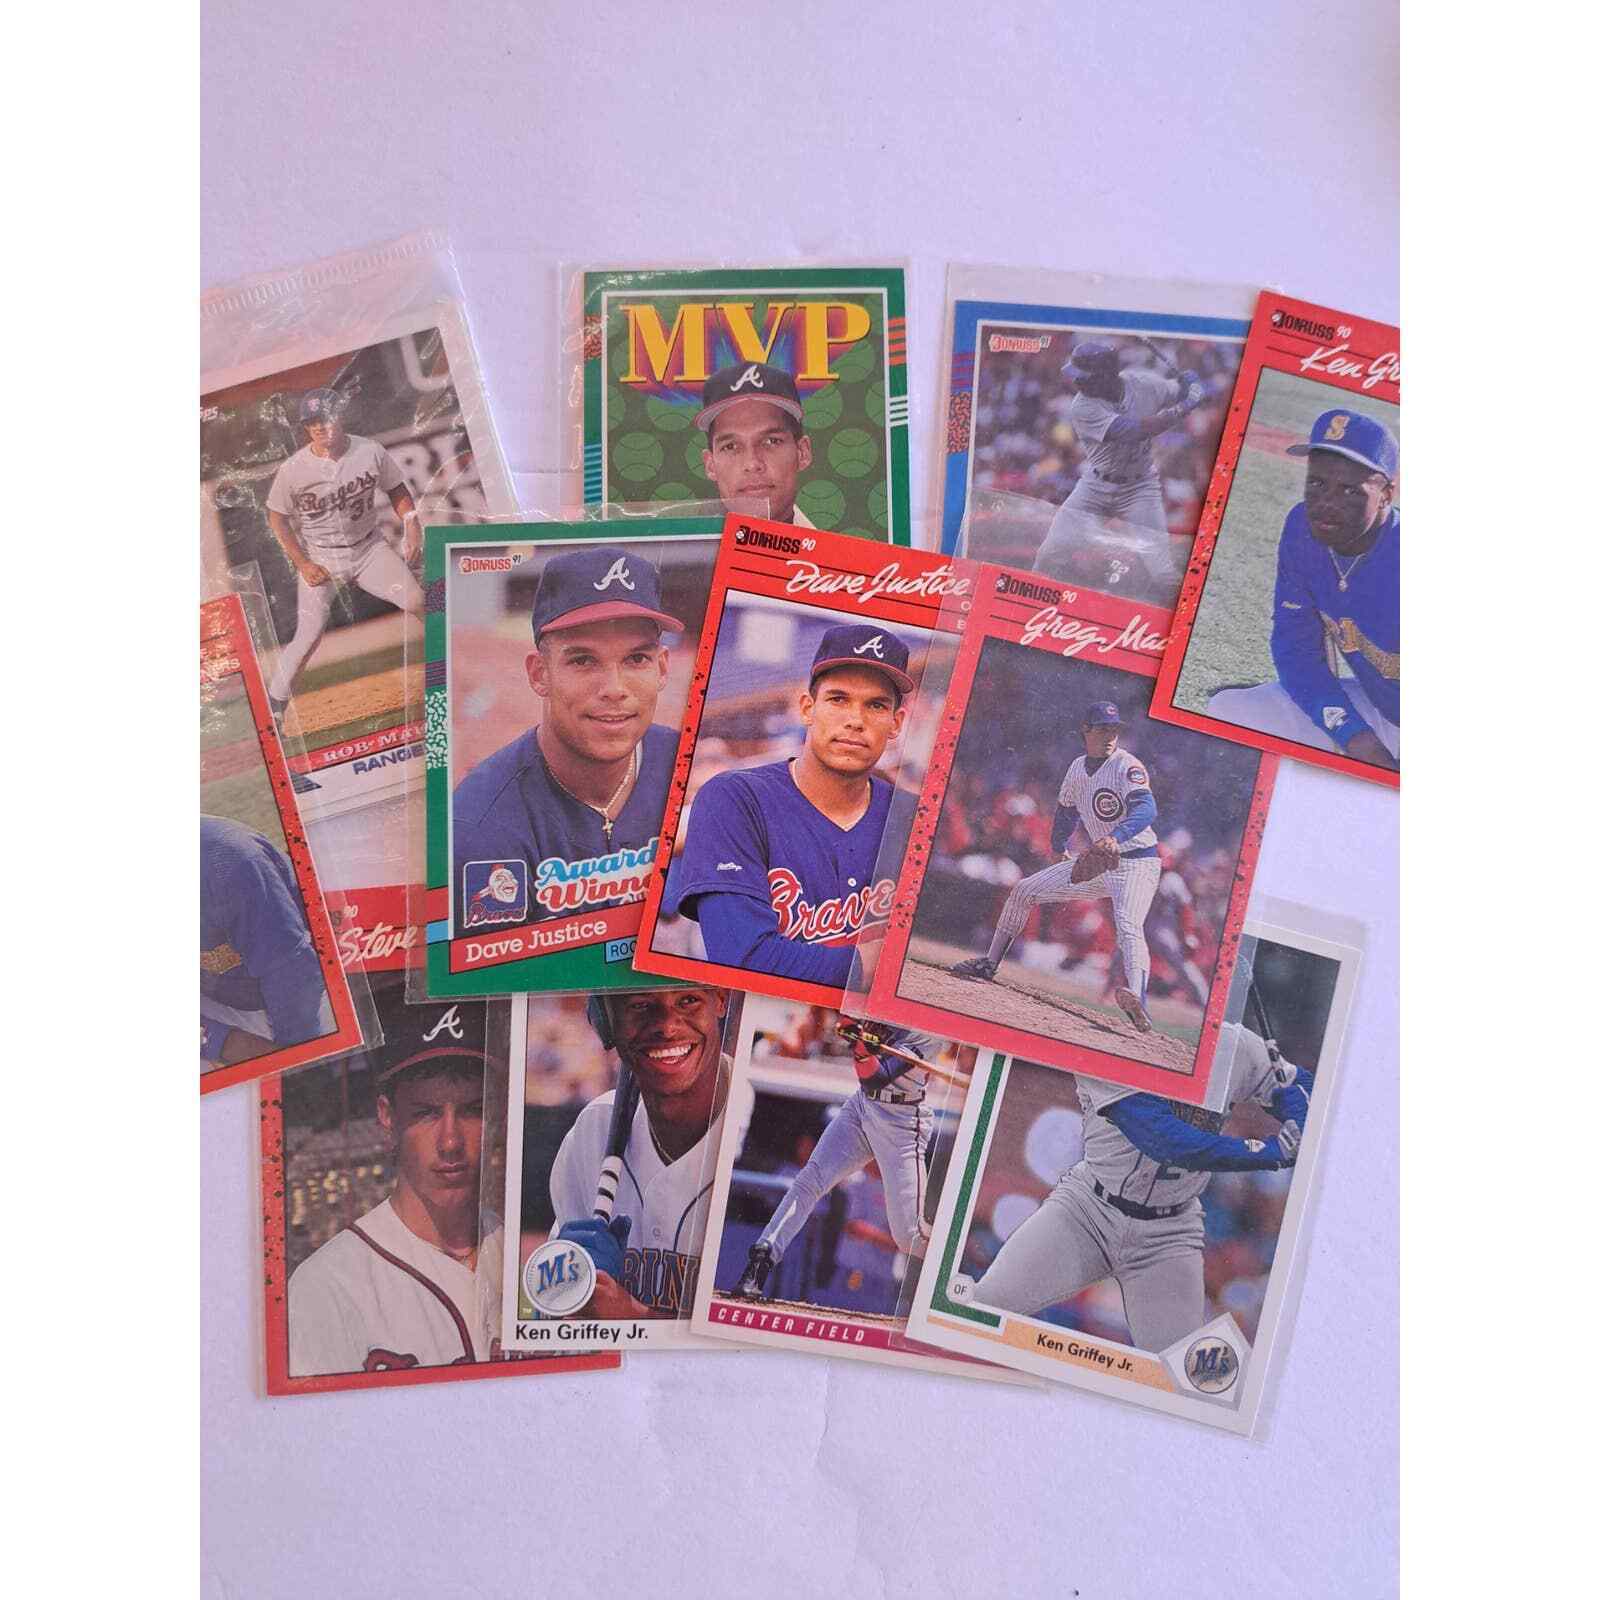 DonRuss 1990 BaseBall cards Lot 12 Cards Great Condition Braves MVP Dave Justice